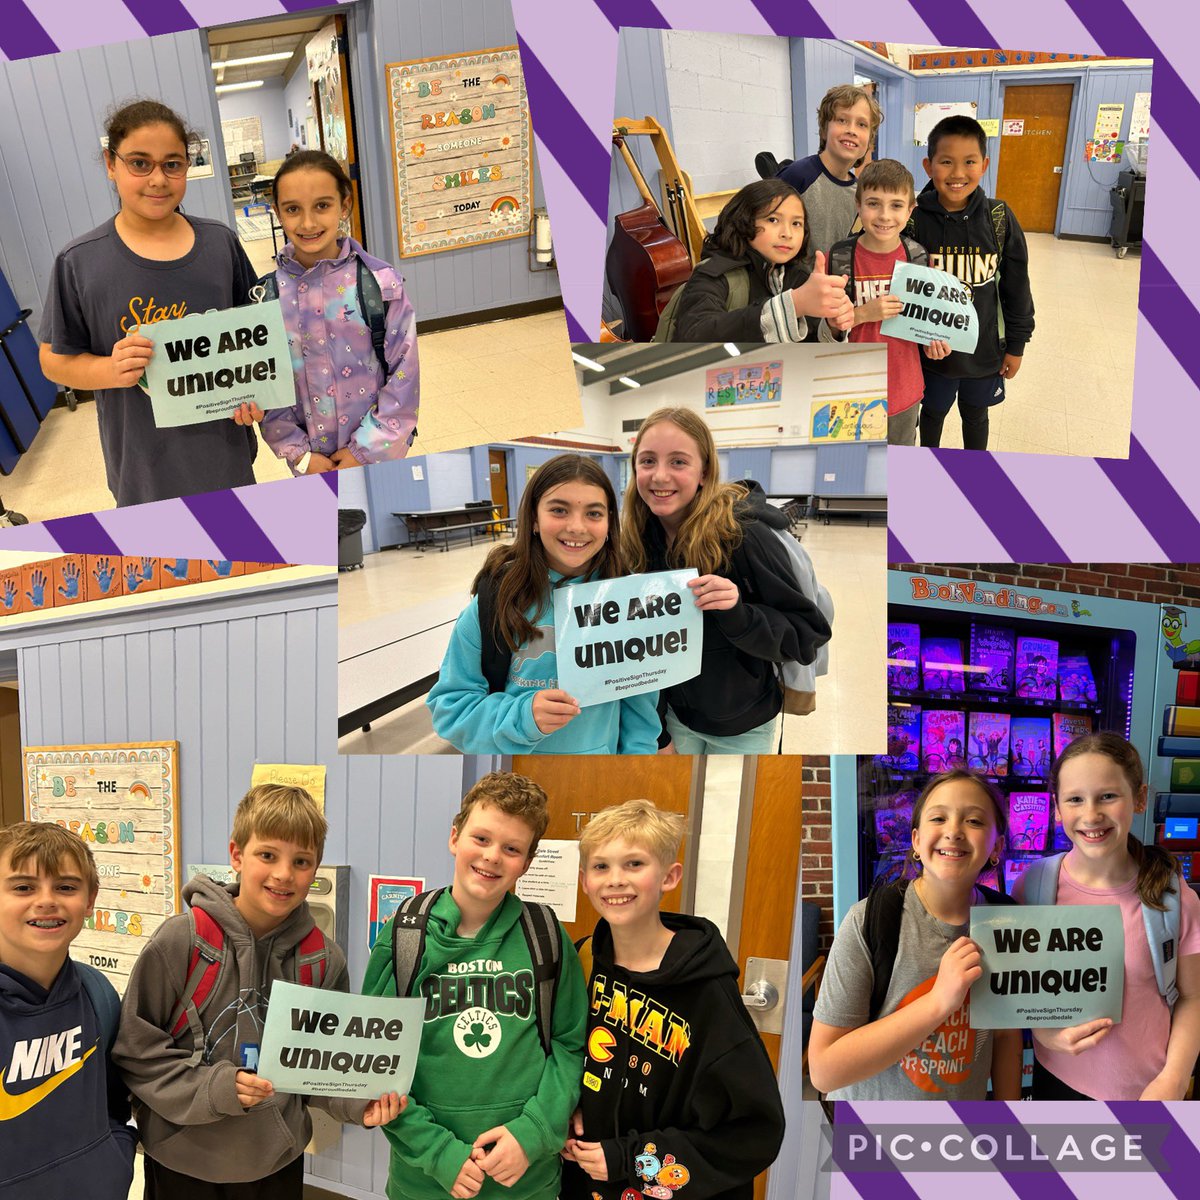 On this #positivesignthursday , #beproudbedale reminds everyone that being different is what makes you extraordinary! #medfieldps #kidsdeserveit #beunique